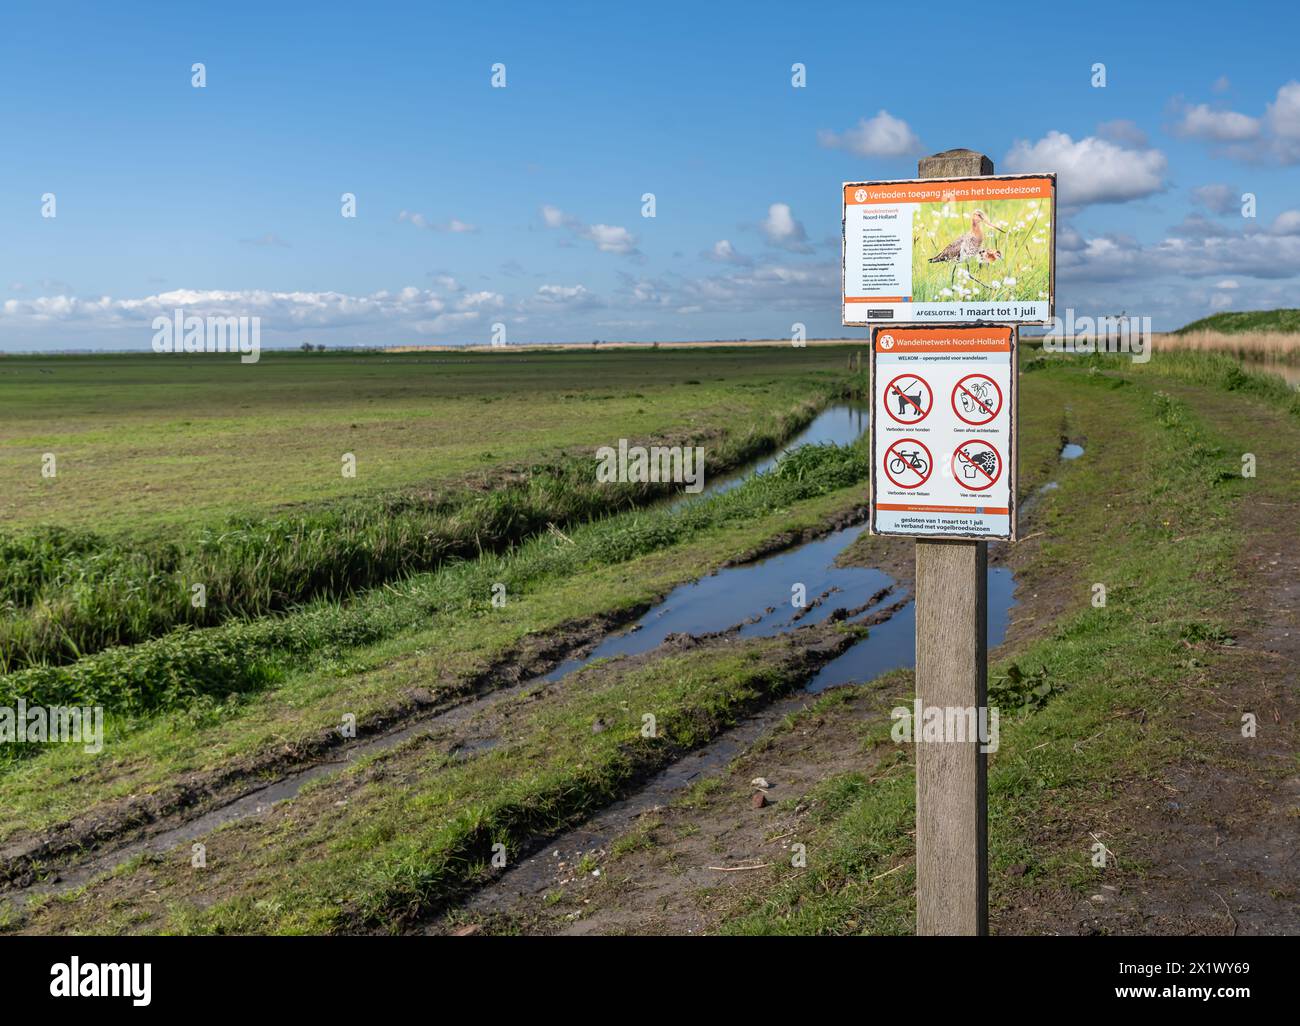 Temporary no entry sign on the side of a dirt road by nature reserve bird sanctuary, prohibited access during the breeding season in the Netherlands Stock Photo